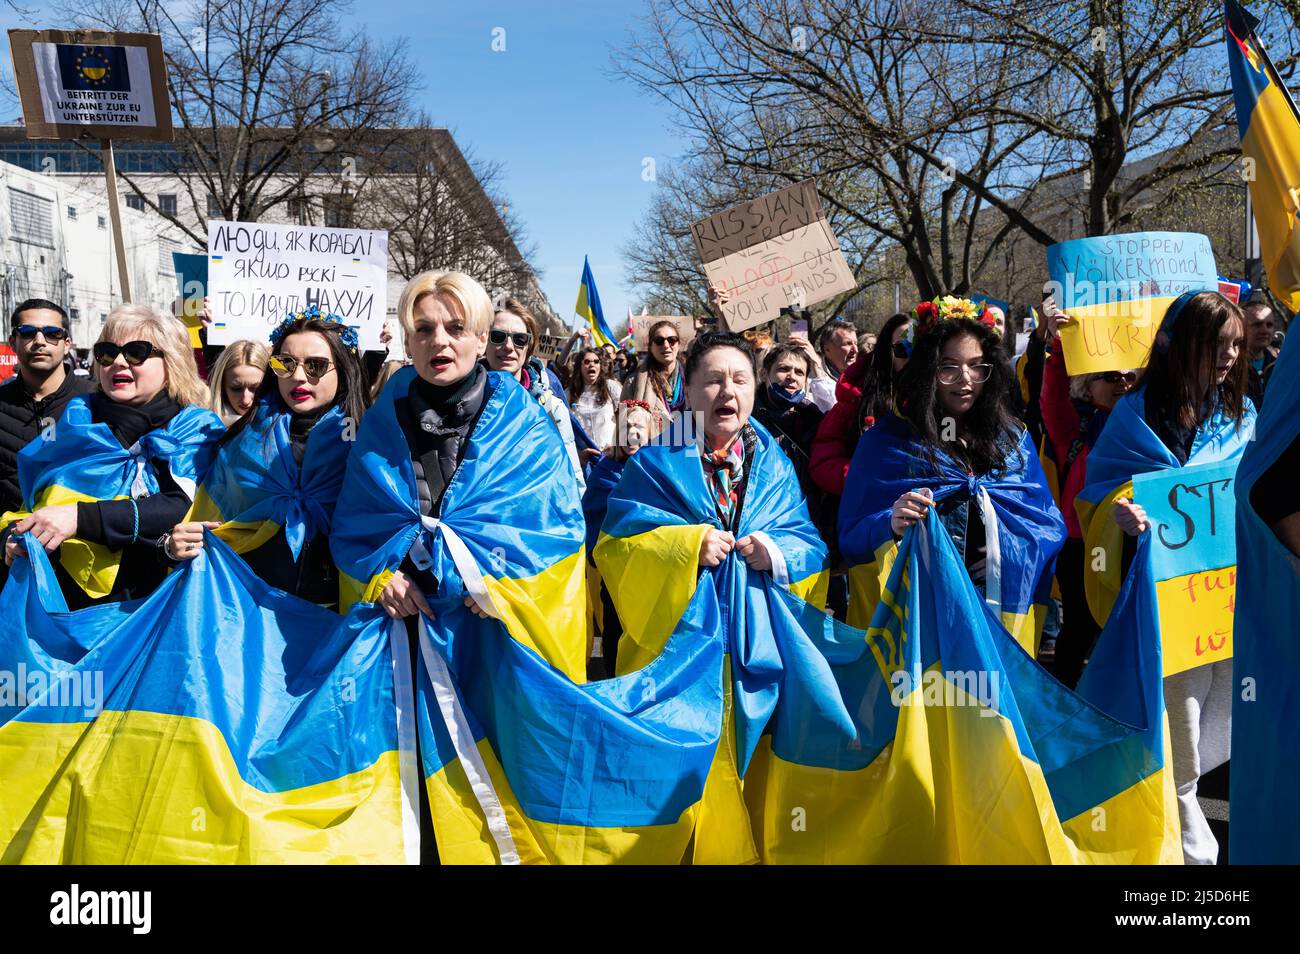 '04/16/2022, Berlin, Germany, Europe - Ukrainian women protest during a demonstration under the slogan ''March for true Peace in Ukraine'' as part of the alternative Easter March, which is directed against Russian military aggression in the two wars in Ukraine and Syria. The demonstrators demand further sanctions against Russia and more support from the West in the form of defensive weapons, as well as the immediate boycott of energy imports from Russia such as oil and gas. [automated translation]' Stock Photo